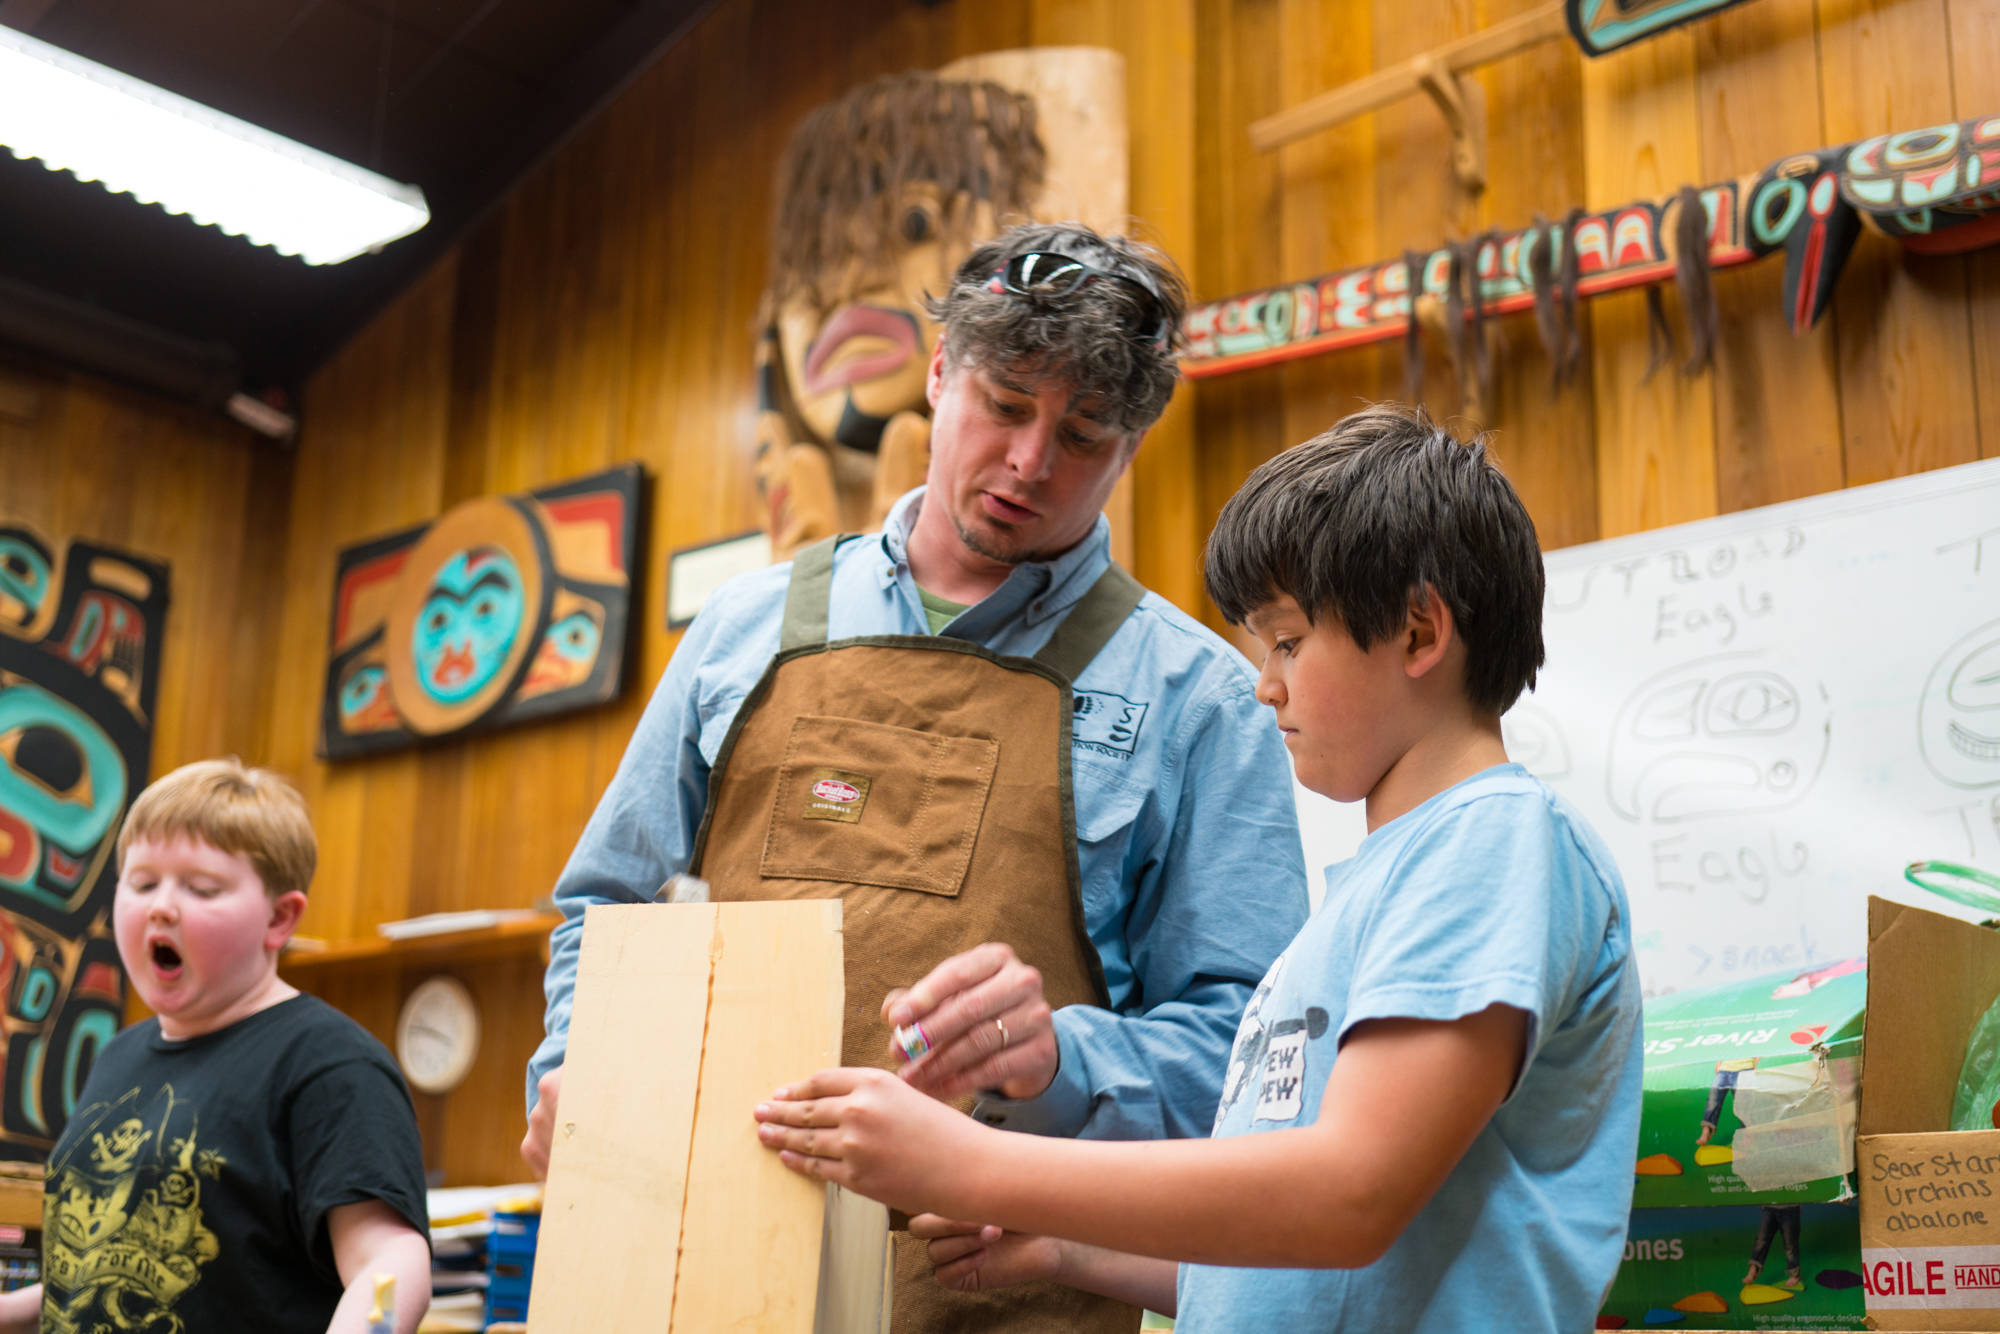 Andrew Thoms is the executive director for the Sitka Conservation Society and one of the founding partners of the Sustainable Southeast Partnership. He is pictured building birdhouses with the 4H-Alaska Way of Life program that SCS hosts with the University of Alaska Fairbanks Cooperative Extension. (Courtesy Photo / Bethany Sonsini Goodrich)